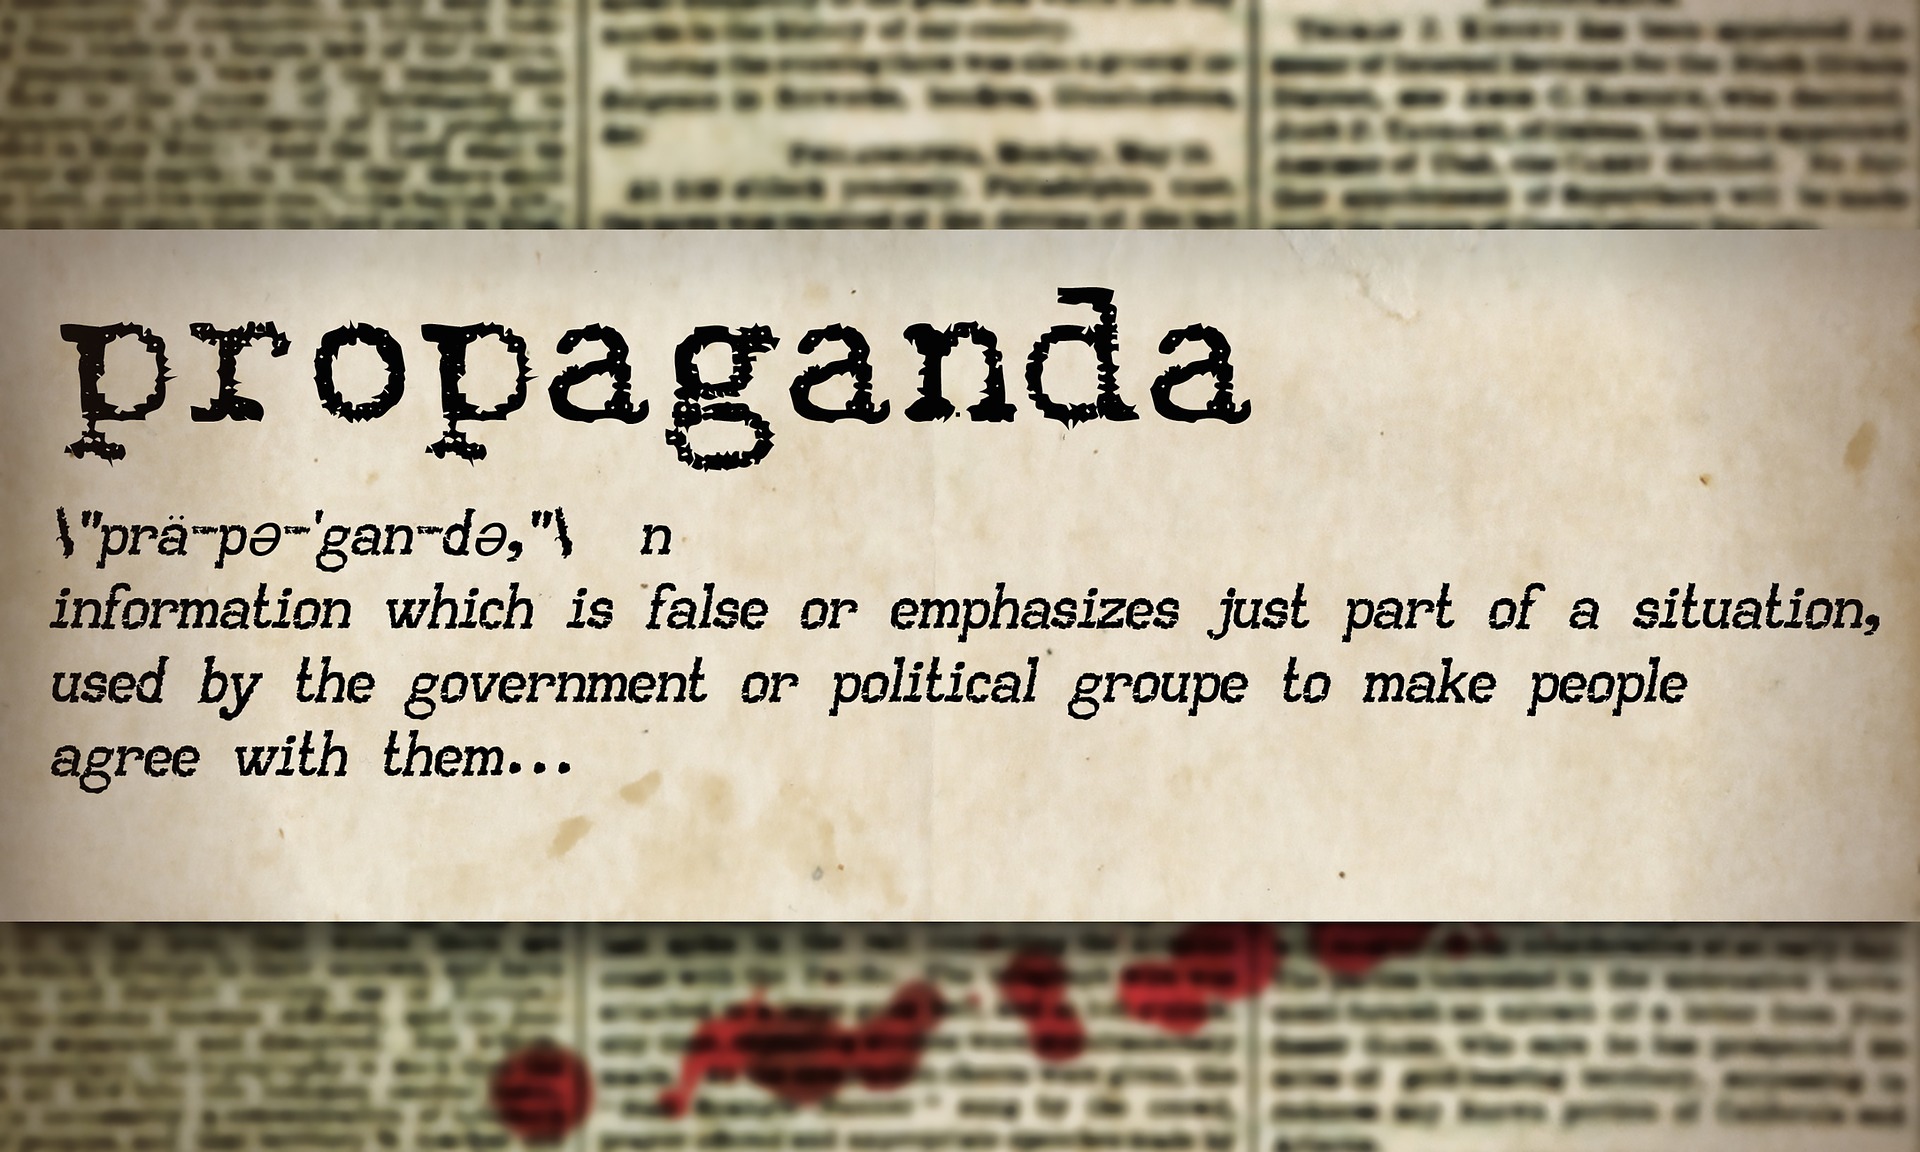 propaganda is misused by governments to effect people's opinion and actions